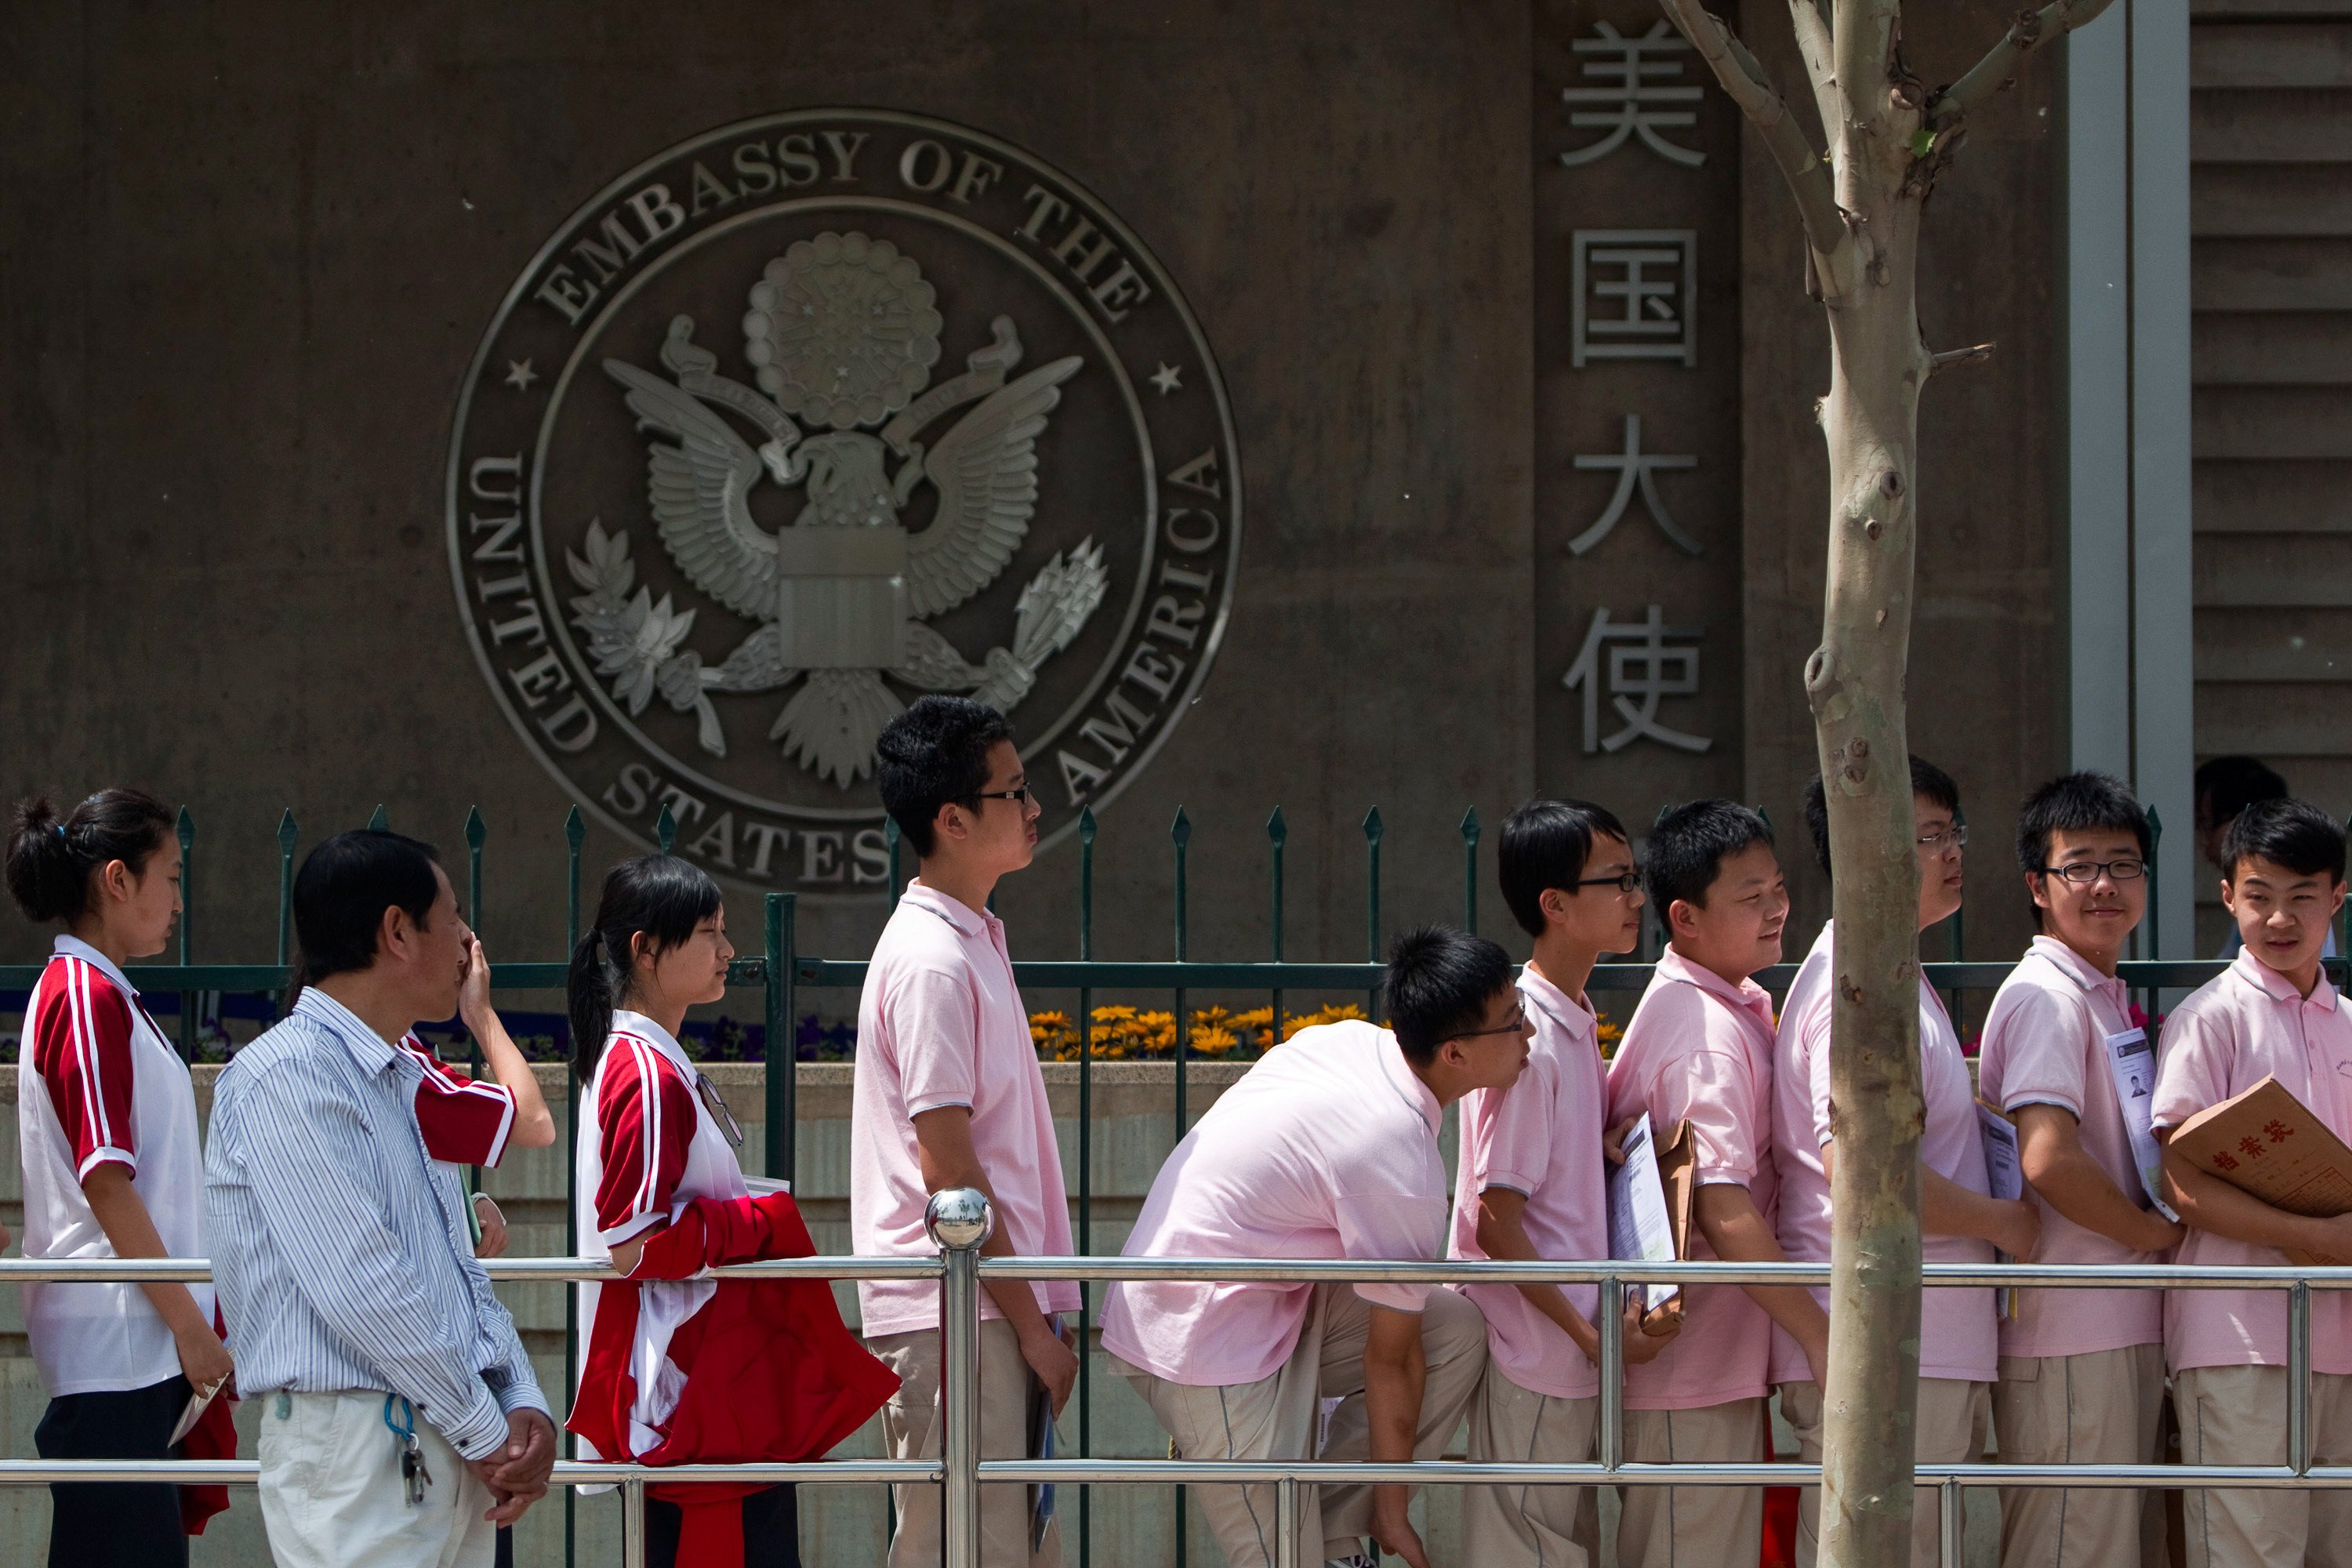 The Chinese embassy in the US has accused the American side of “unjustifiably” sending back nearly 300 Chinese citizens since July 2021, including more than 70 Chinese students that it says had legal and valid travel documents. Photo: AP